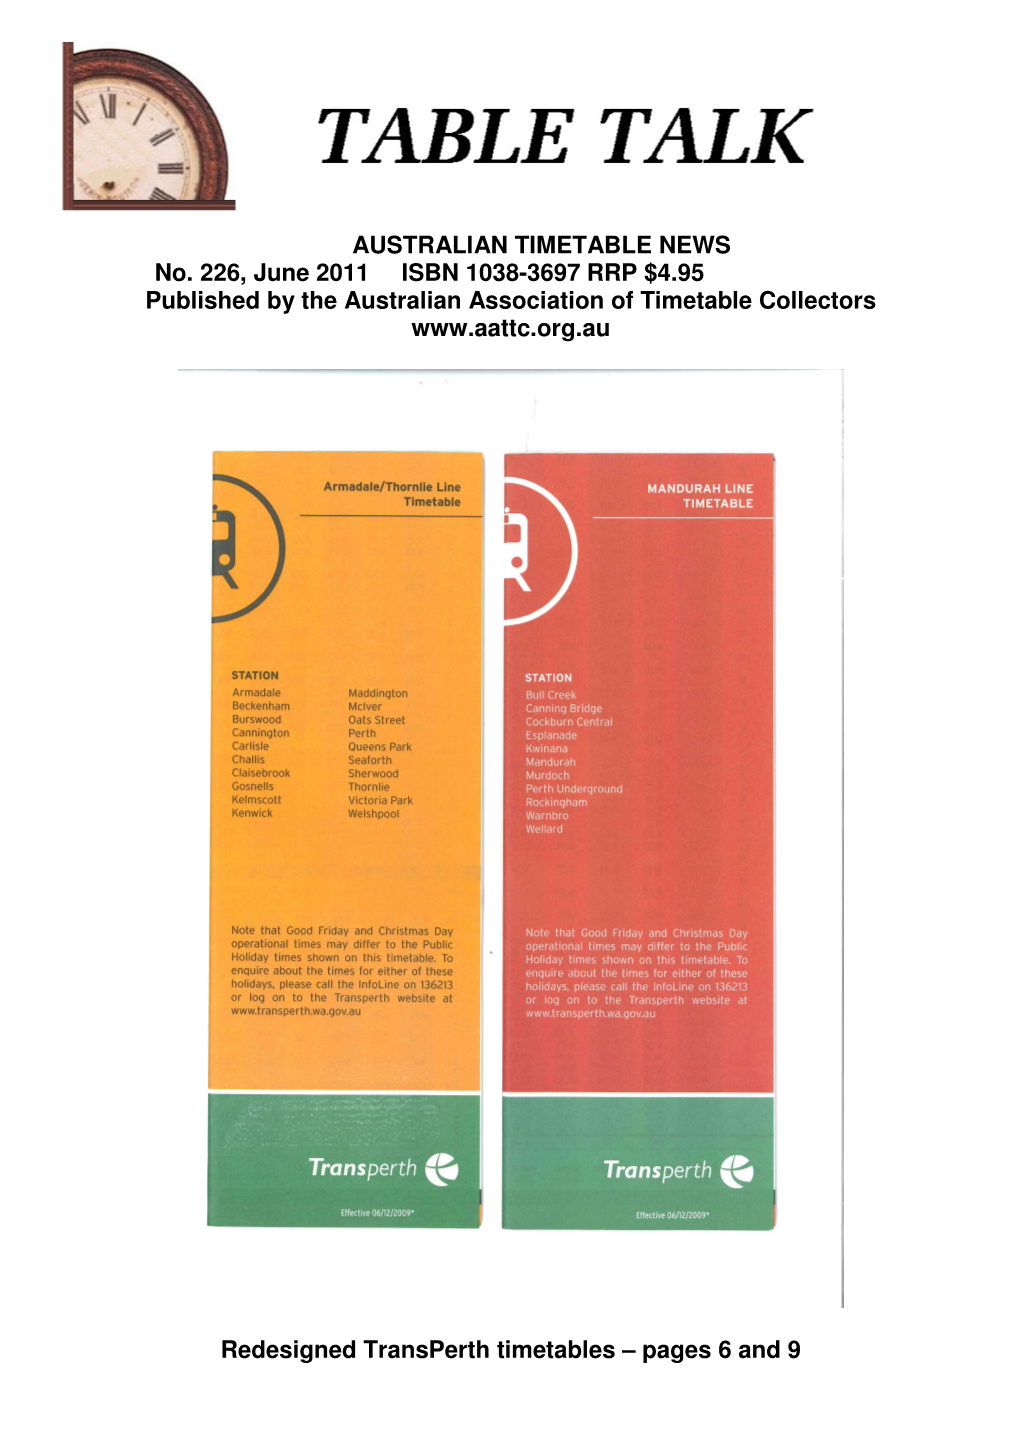 AUSTRALIAN TIMETABLE NEWS No. 226, June 2011 ISBN 1038-3697 RRP $4.95 Published by the Australian Association of Timetable Collectors